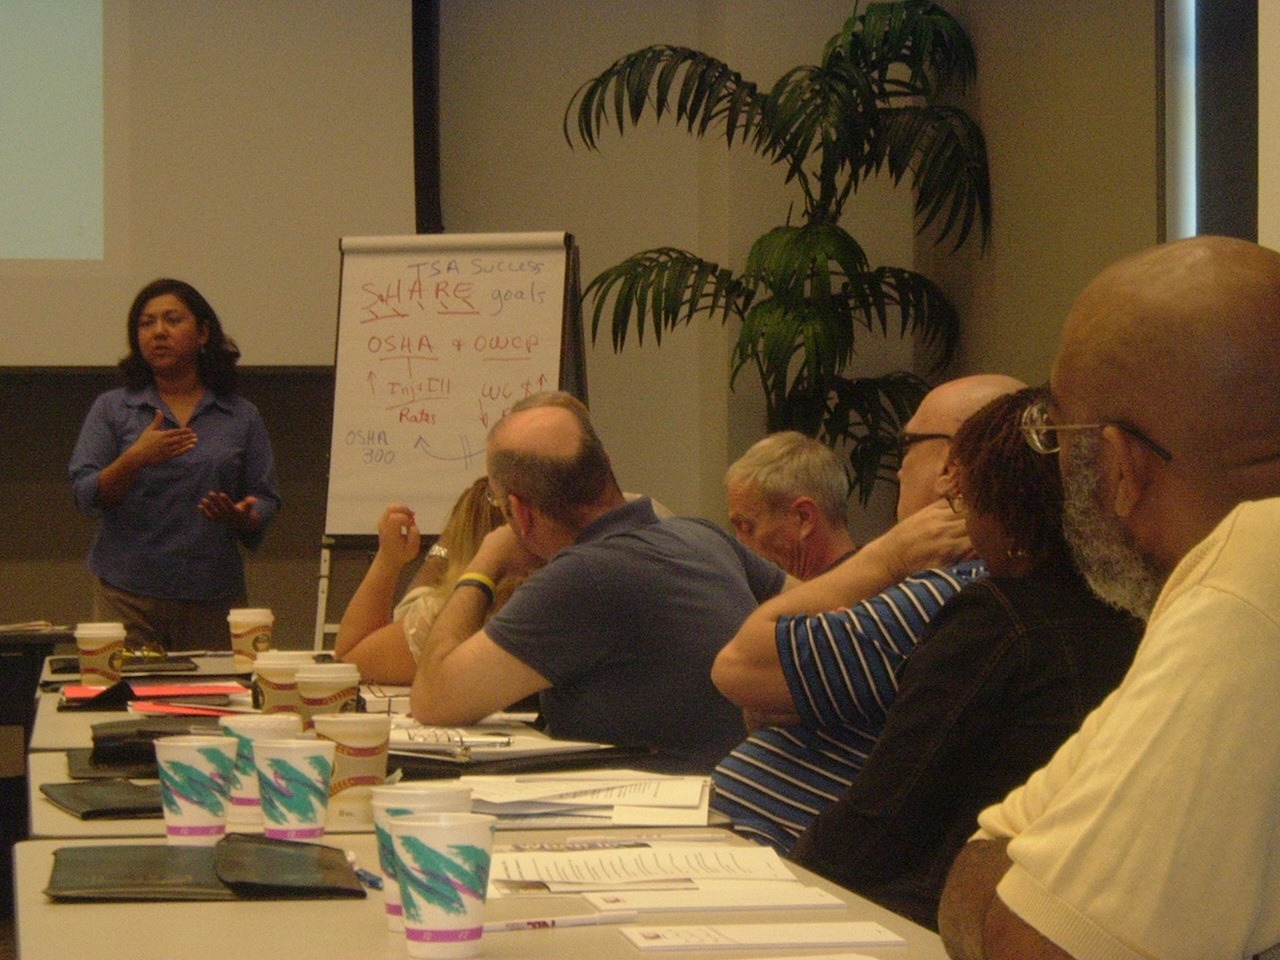 Milly Rodriguez conducting a training